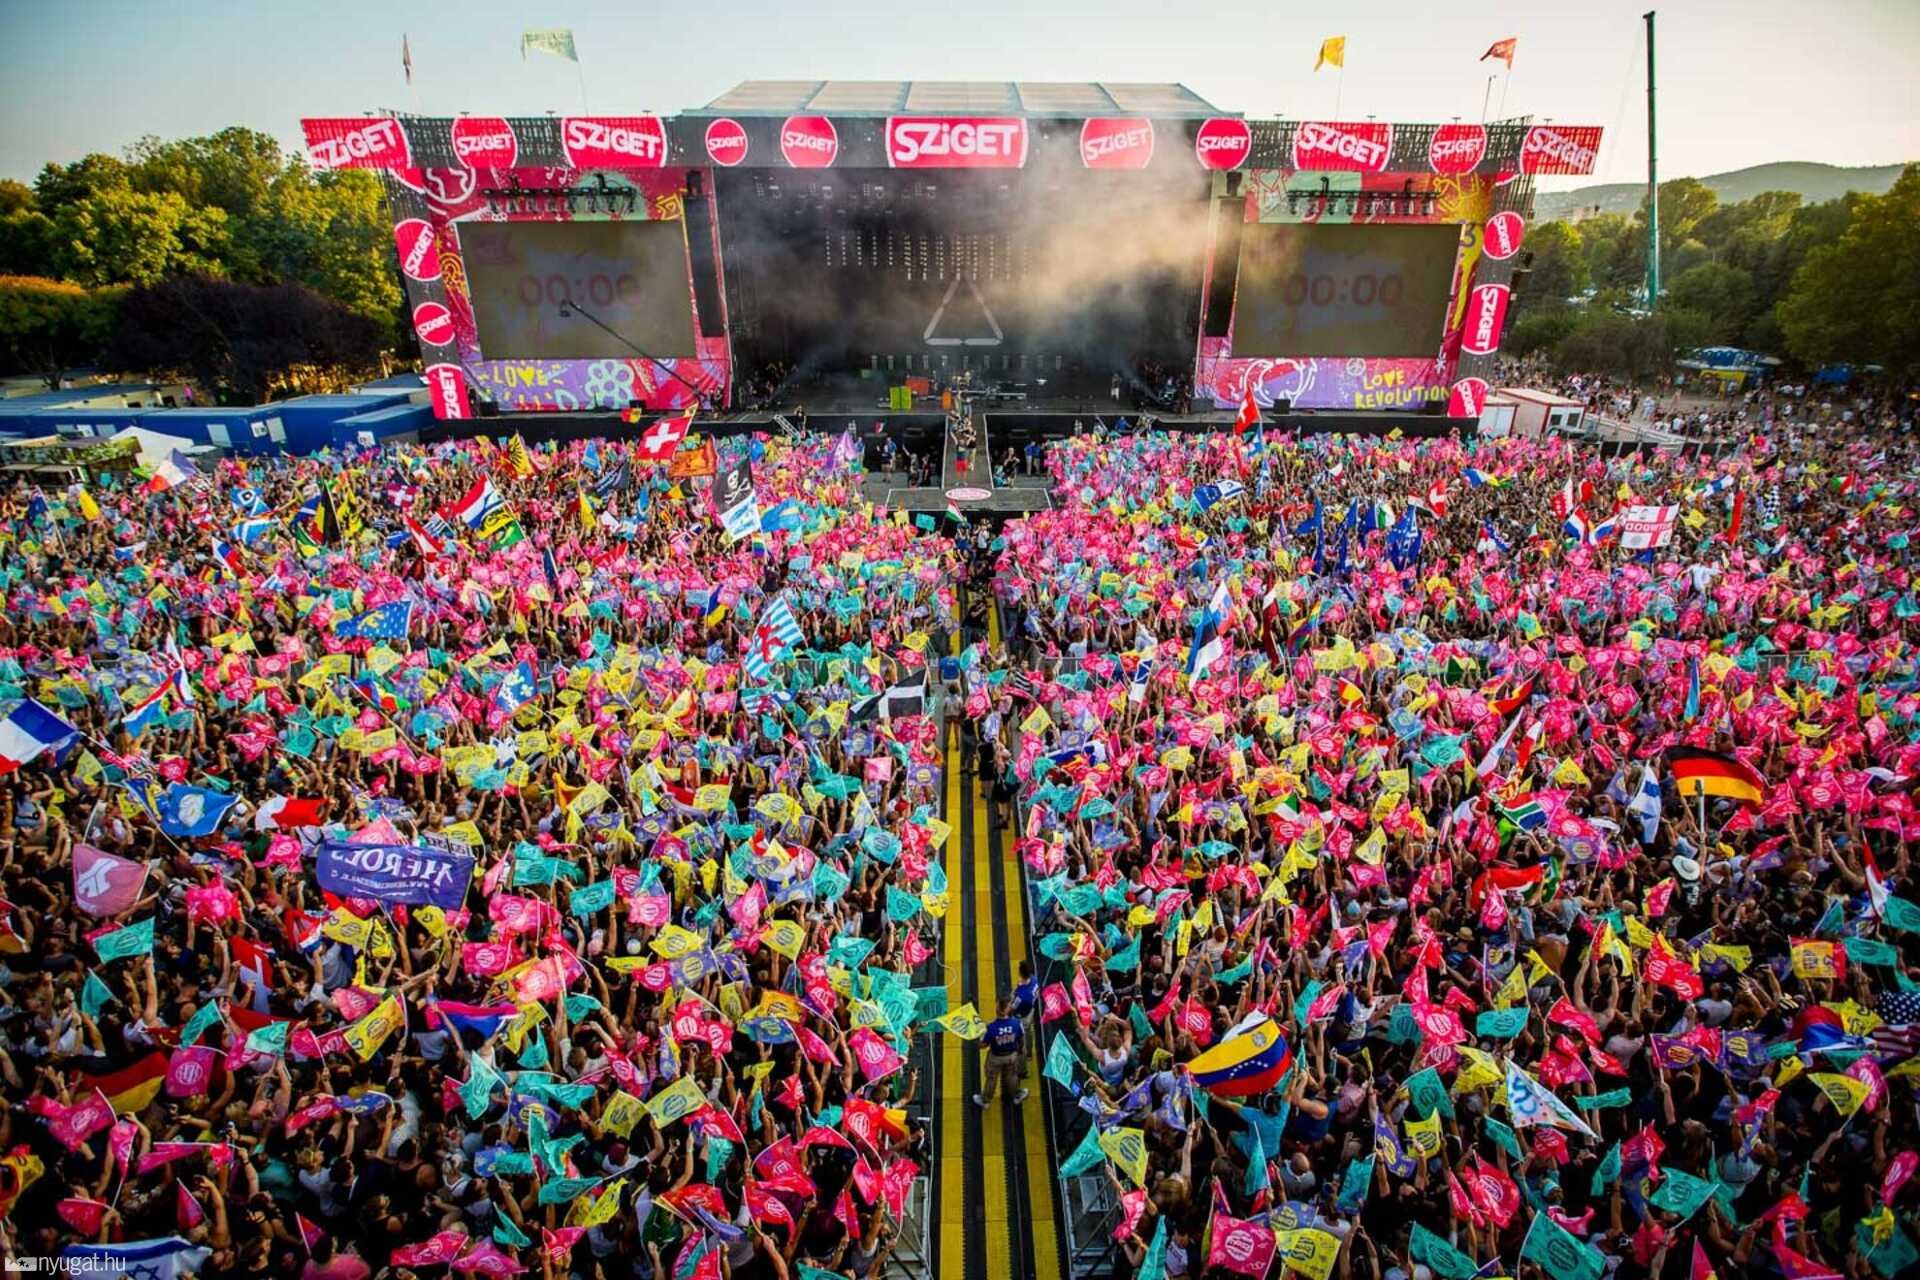 Insider's Guide: Top 9 Music Venues at Sziget Festival “The Island of Freedom” in Budapest